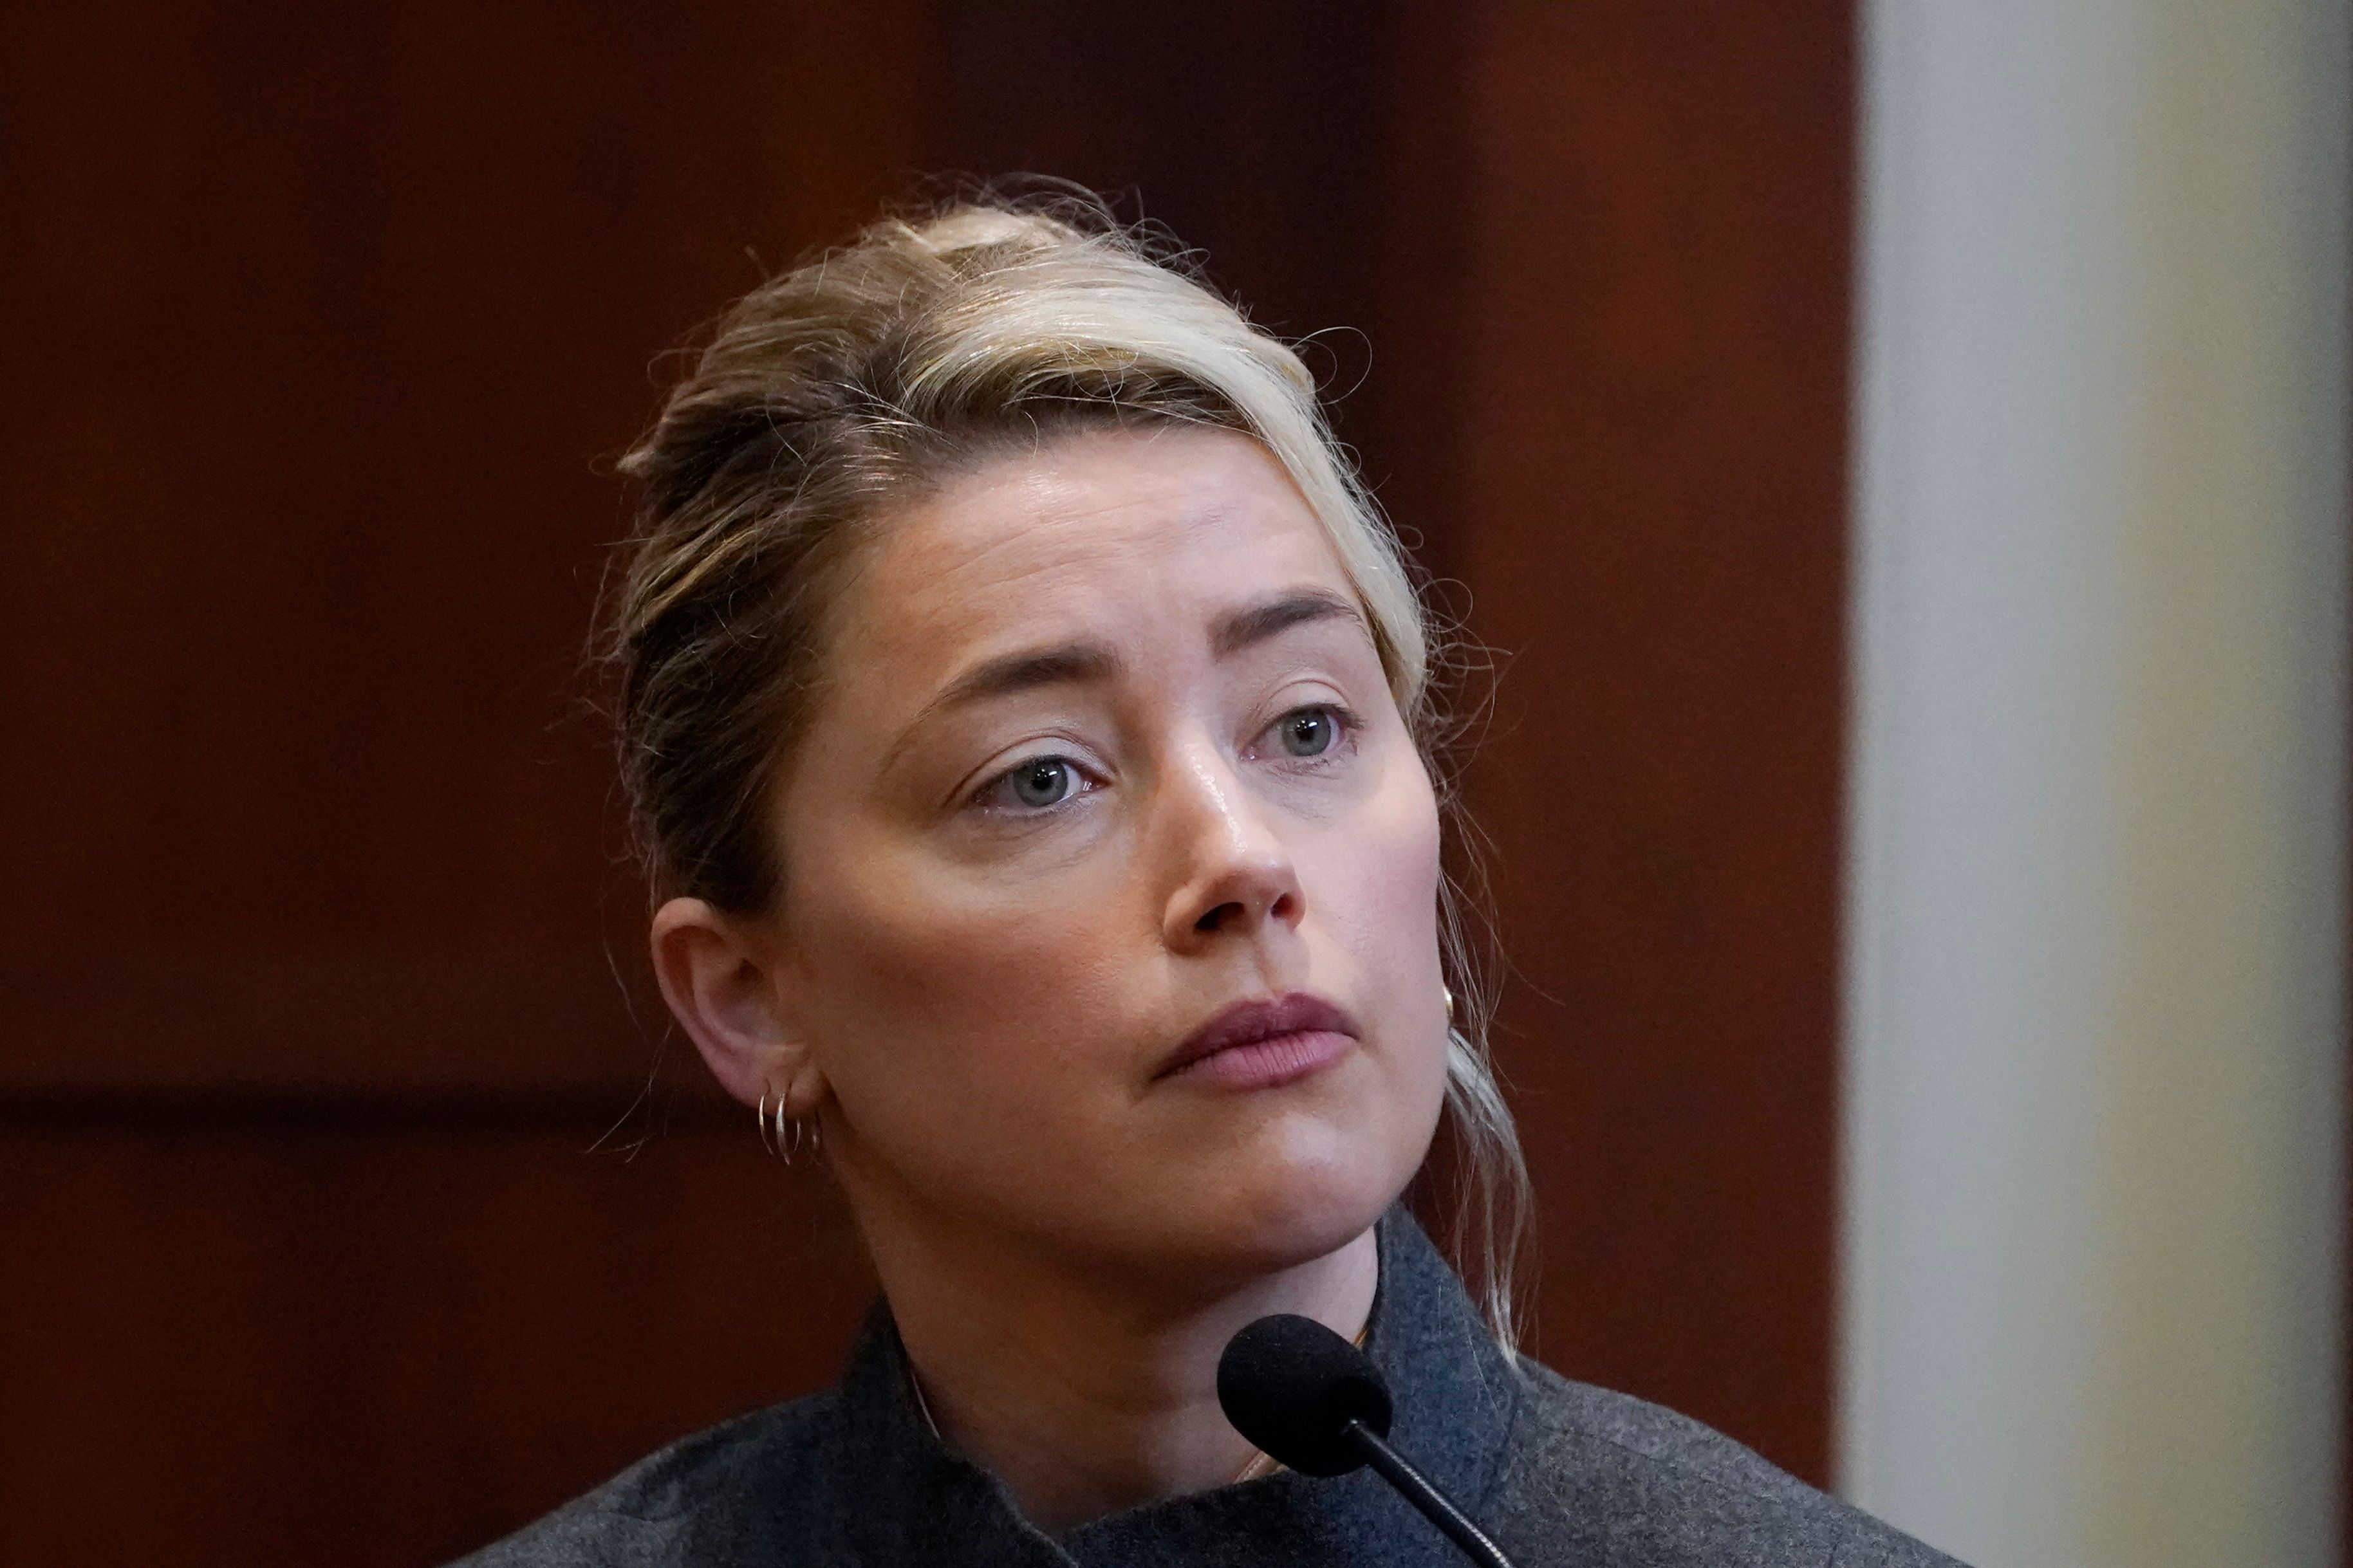 Movie actor Amber Heard testifies in the courtroom at the trial for her lawsuit with ex-husband Johnny Depp 